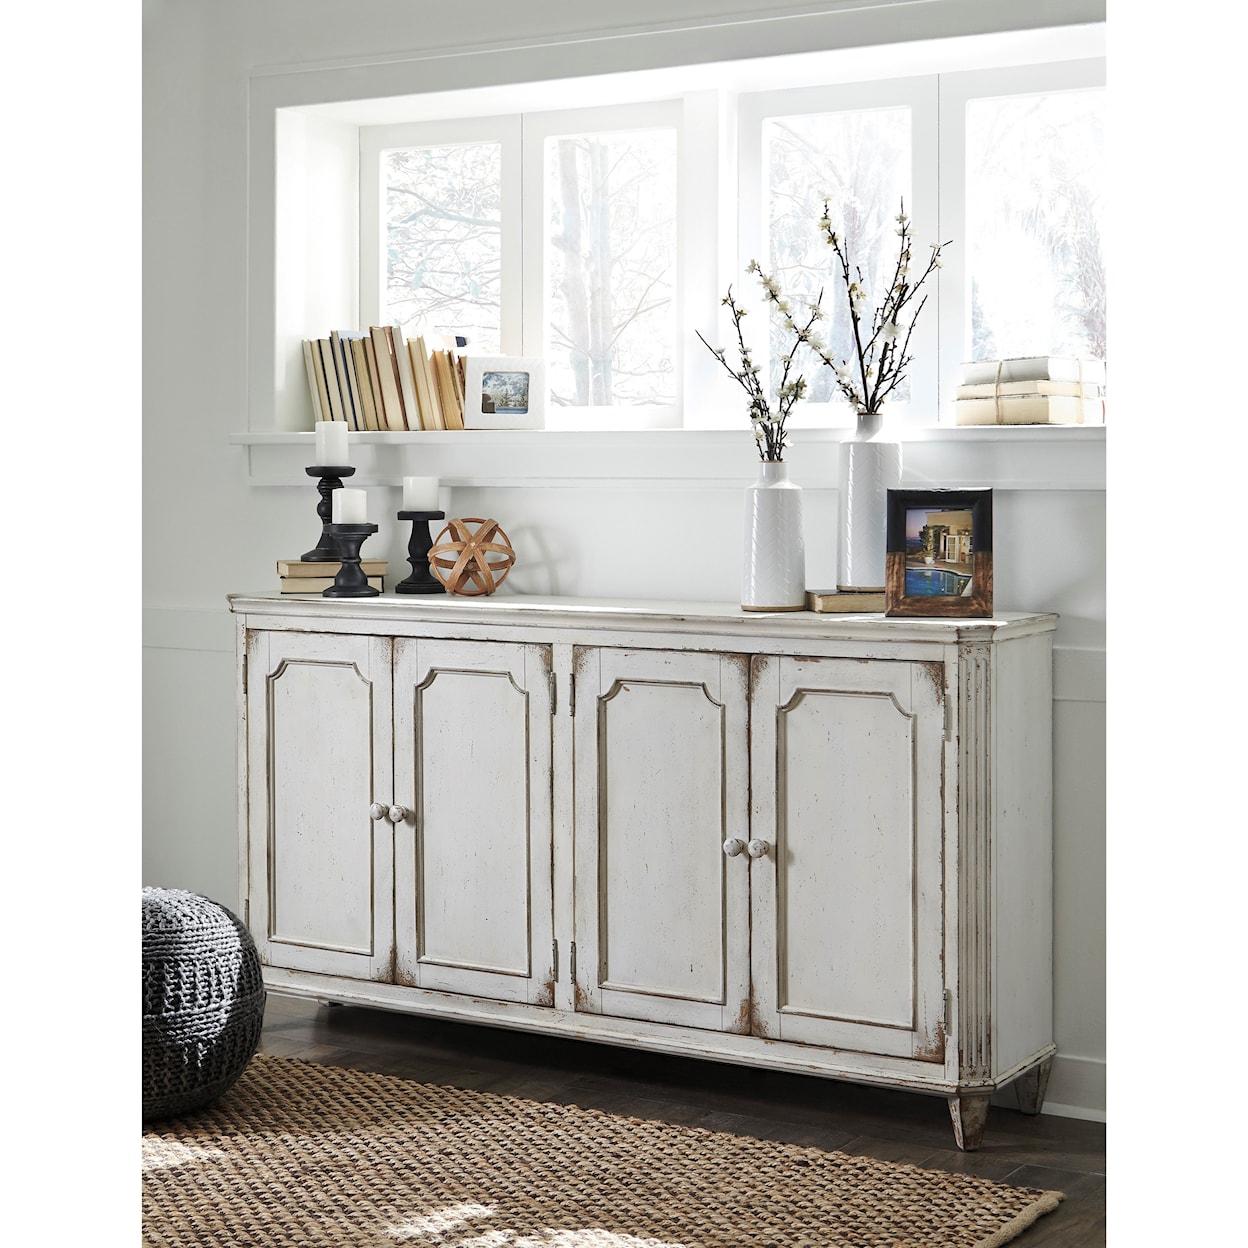 Signature Design by Ashley Cottage Accents Door Accent Cabinet